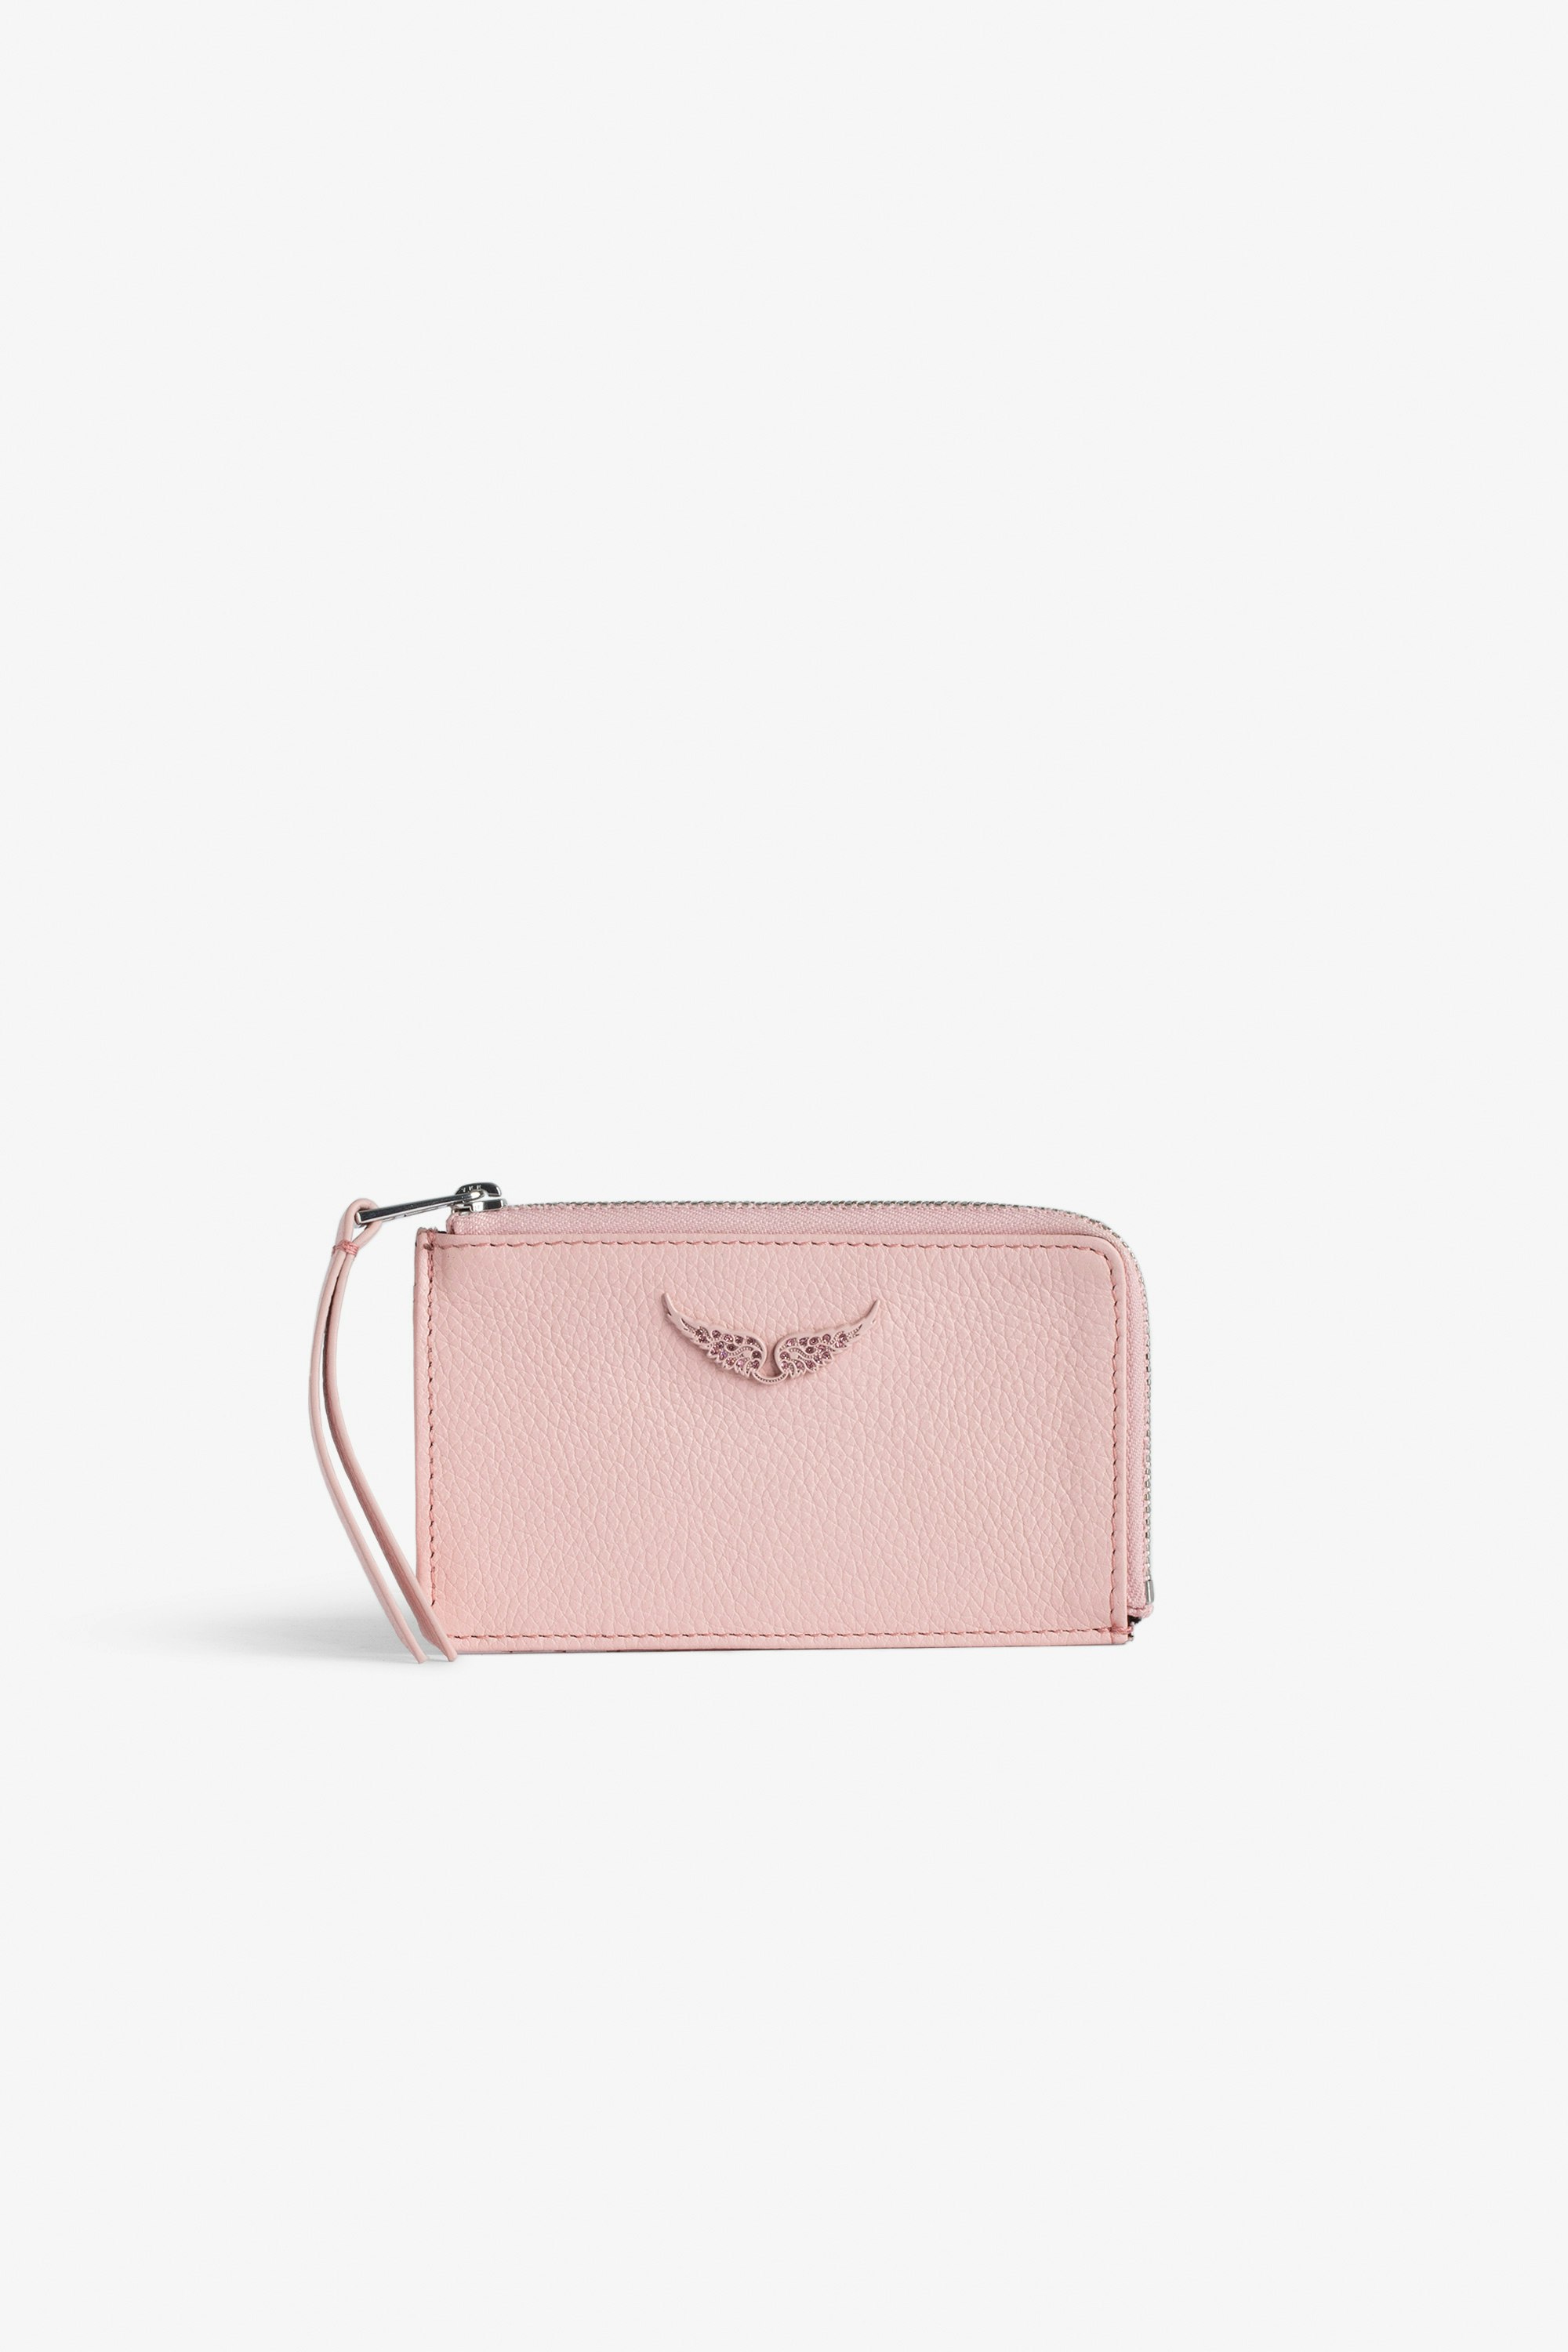 ZV Card 財布 Women’s pink grained leather card holder with wings charm.